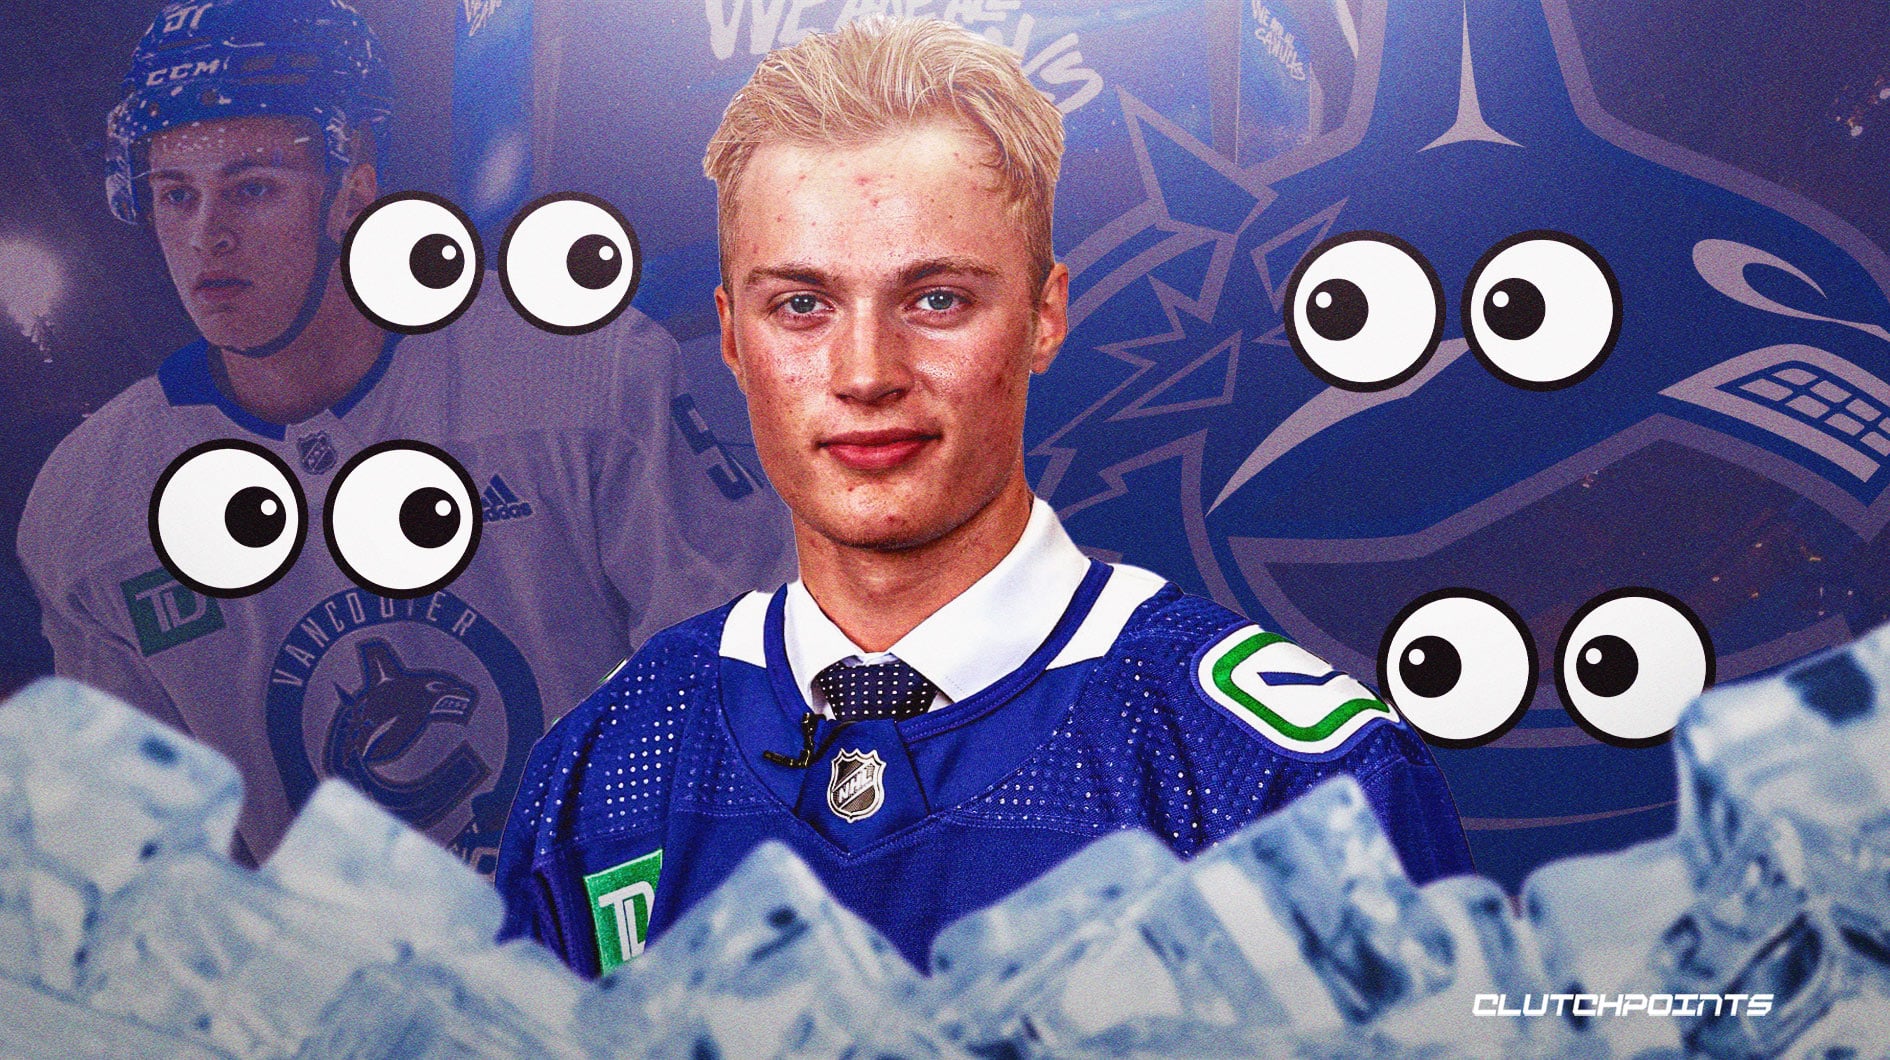 Canucks 2 prospects to watch ahead of NHL training camp